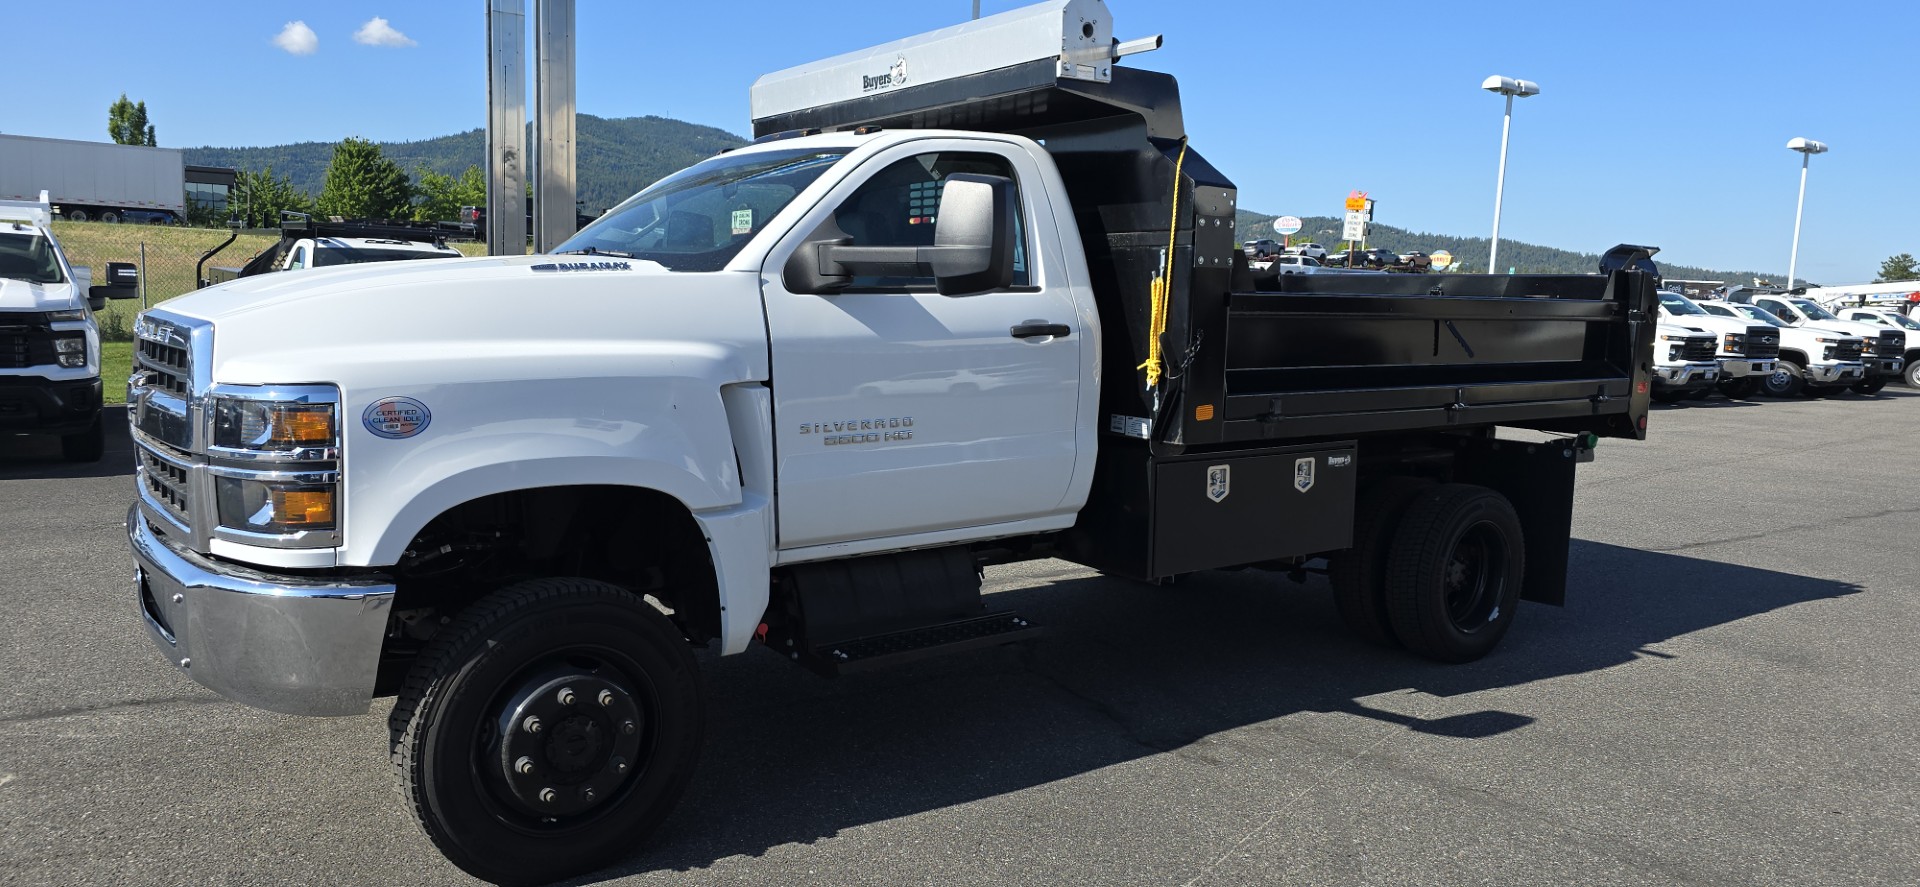 2023 Chevrolet Silverado Chassis Cab Vehicle Photo in POST FALLS, ID 83854-5365